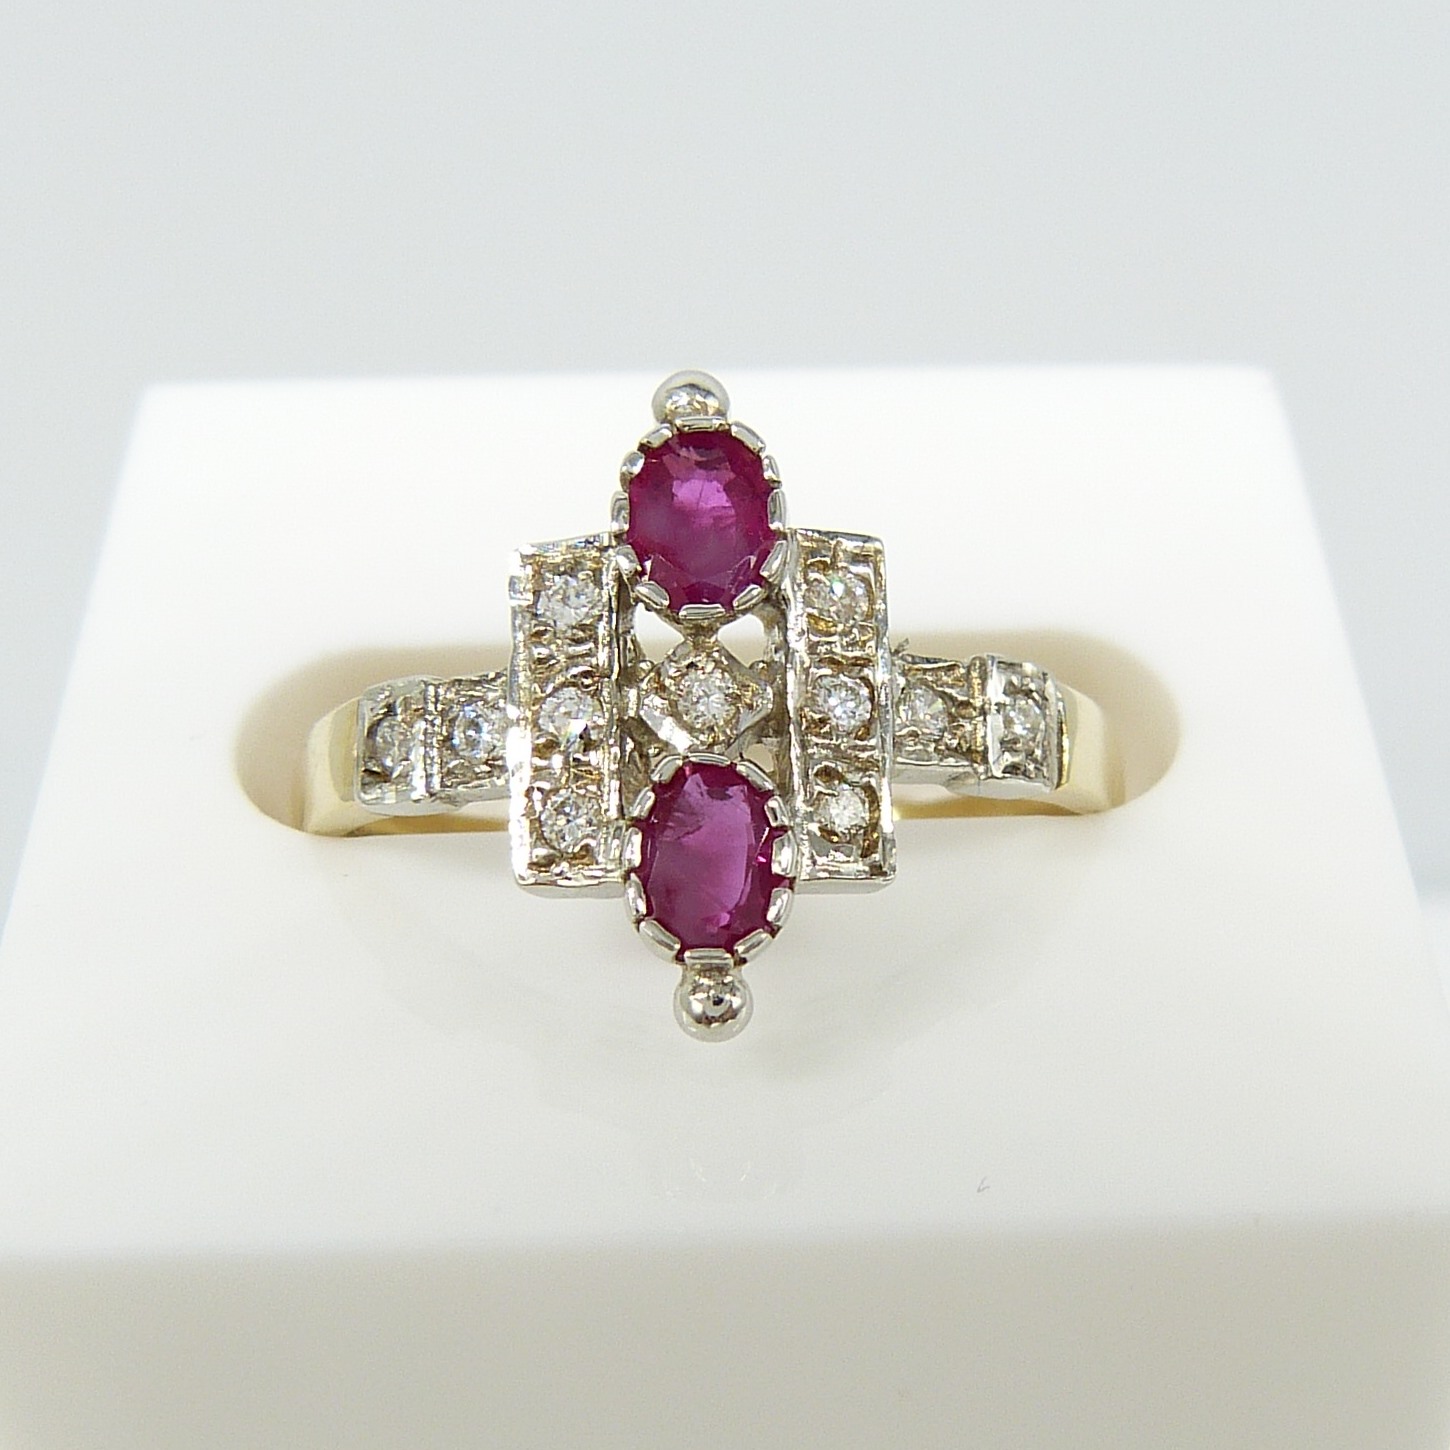 Vintage deco-inspired yellow and white gold ring set with rubies and diamonds - Image 3 of 8